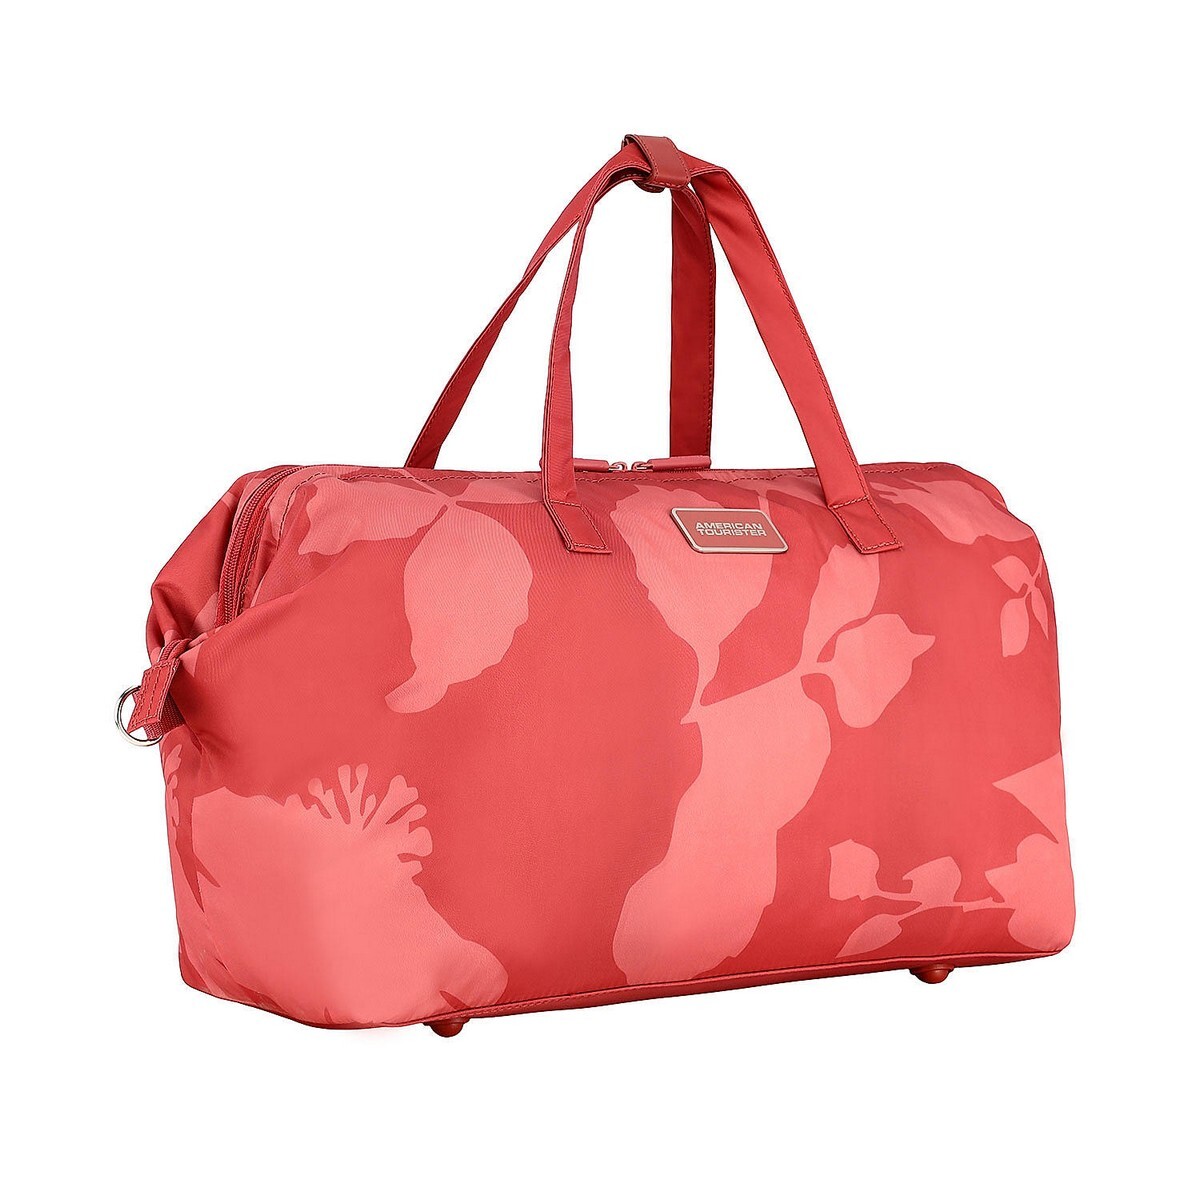 American Tourister Duffle Bag Bloom 45cm 01 Red